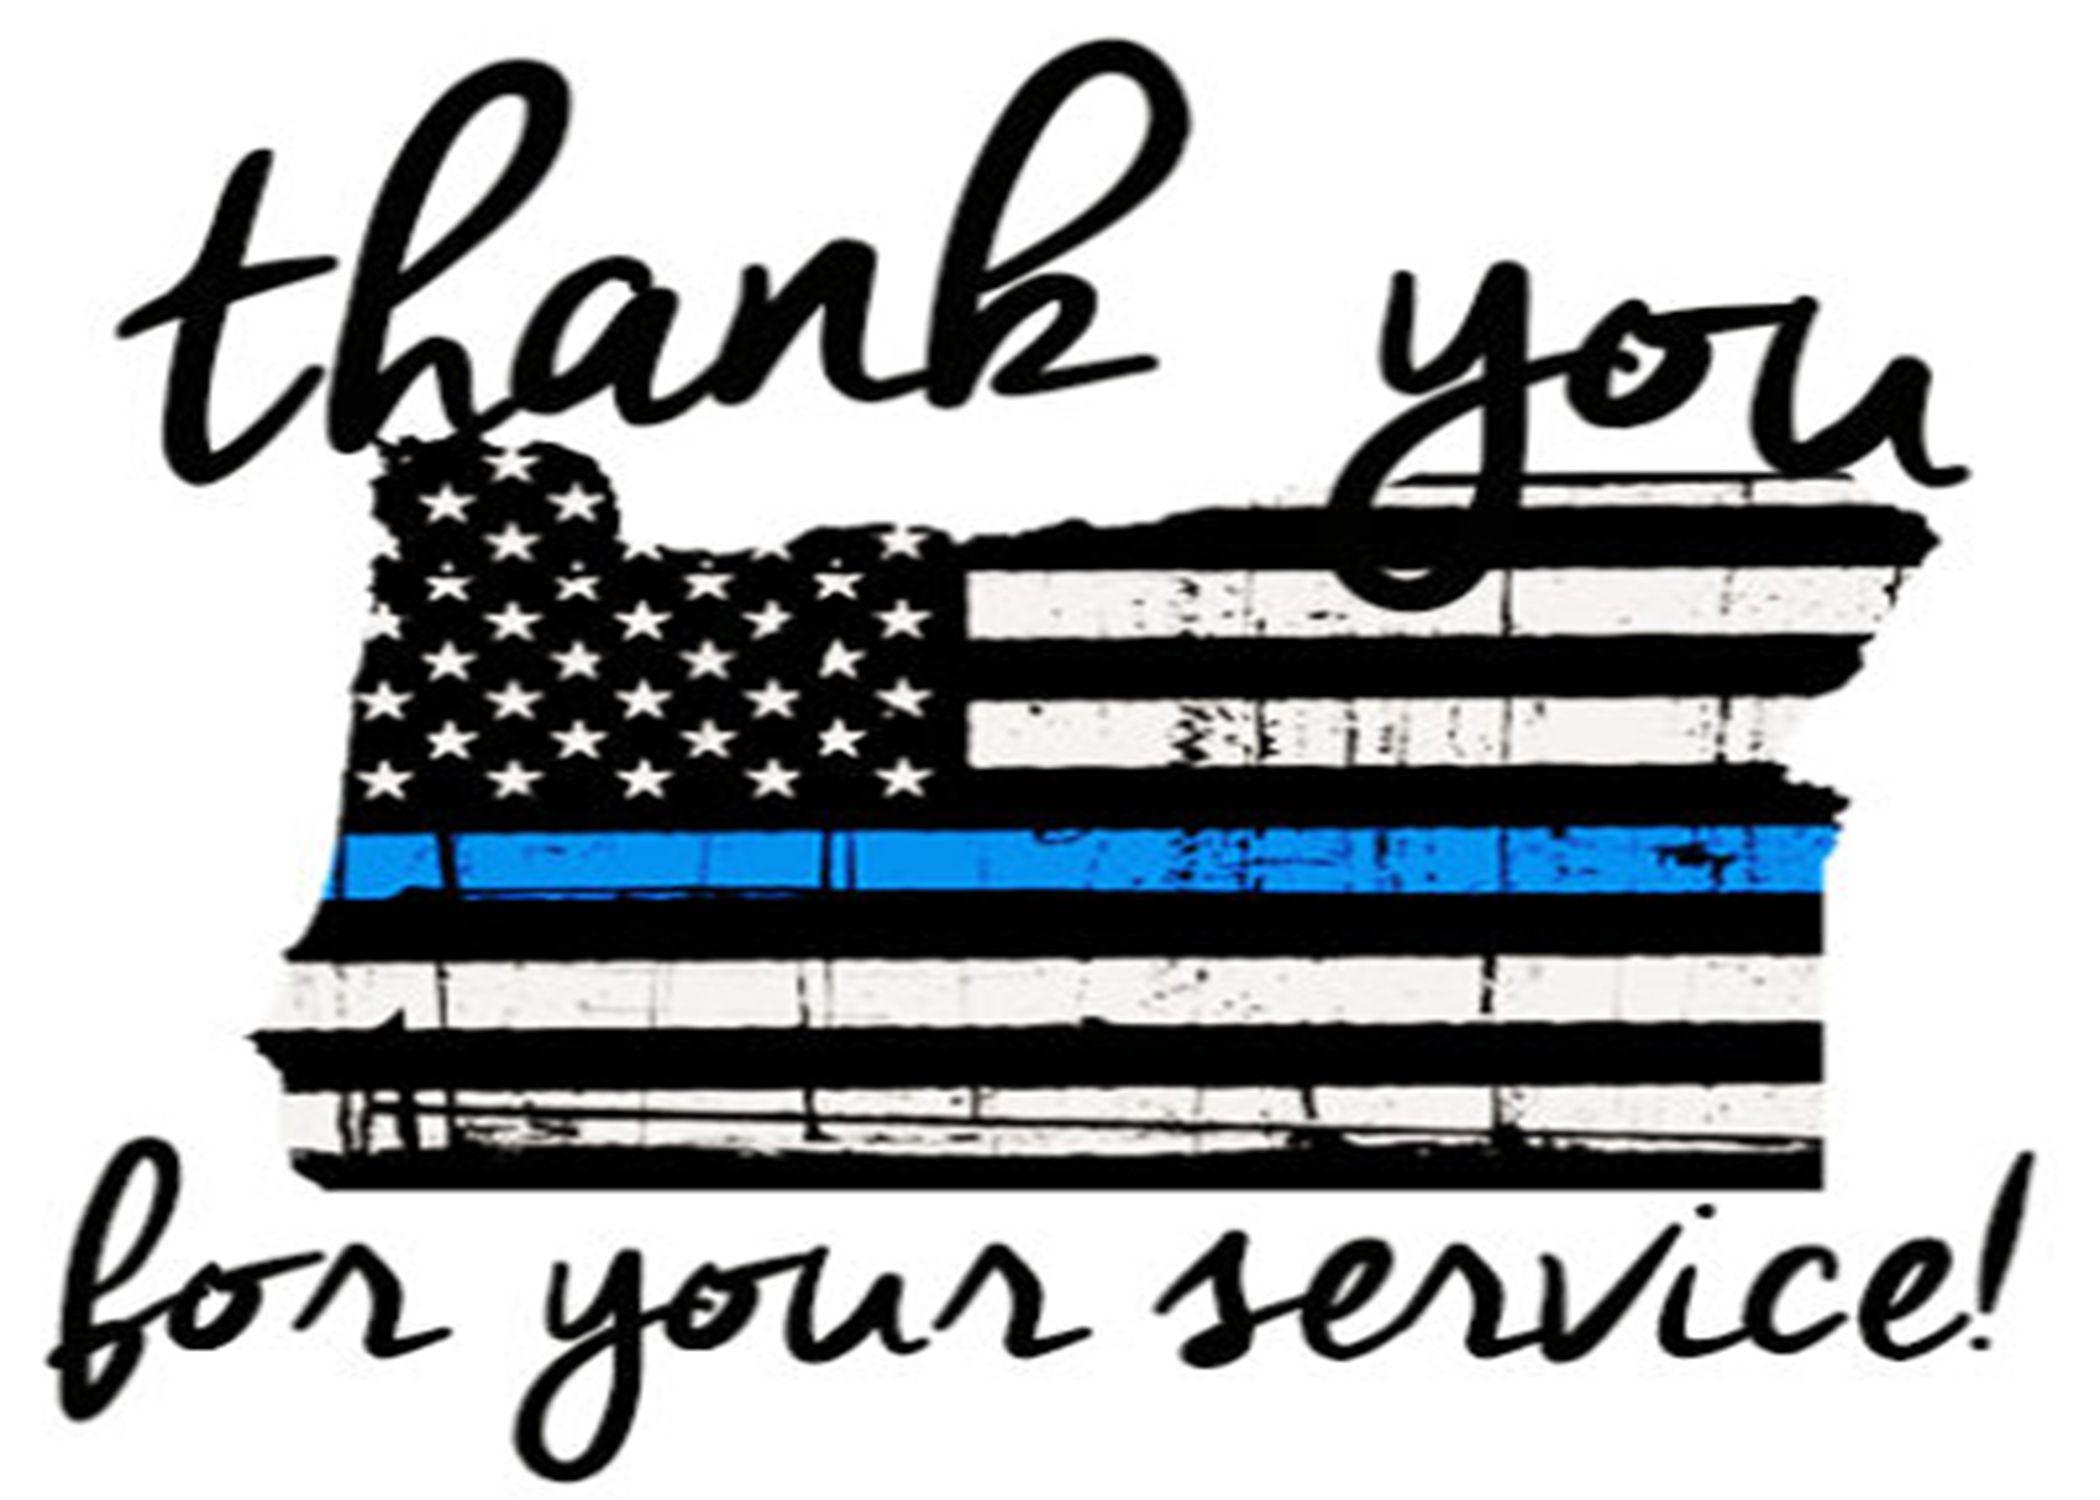 Thank you for #protecting & #serving our communities #LHCPD